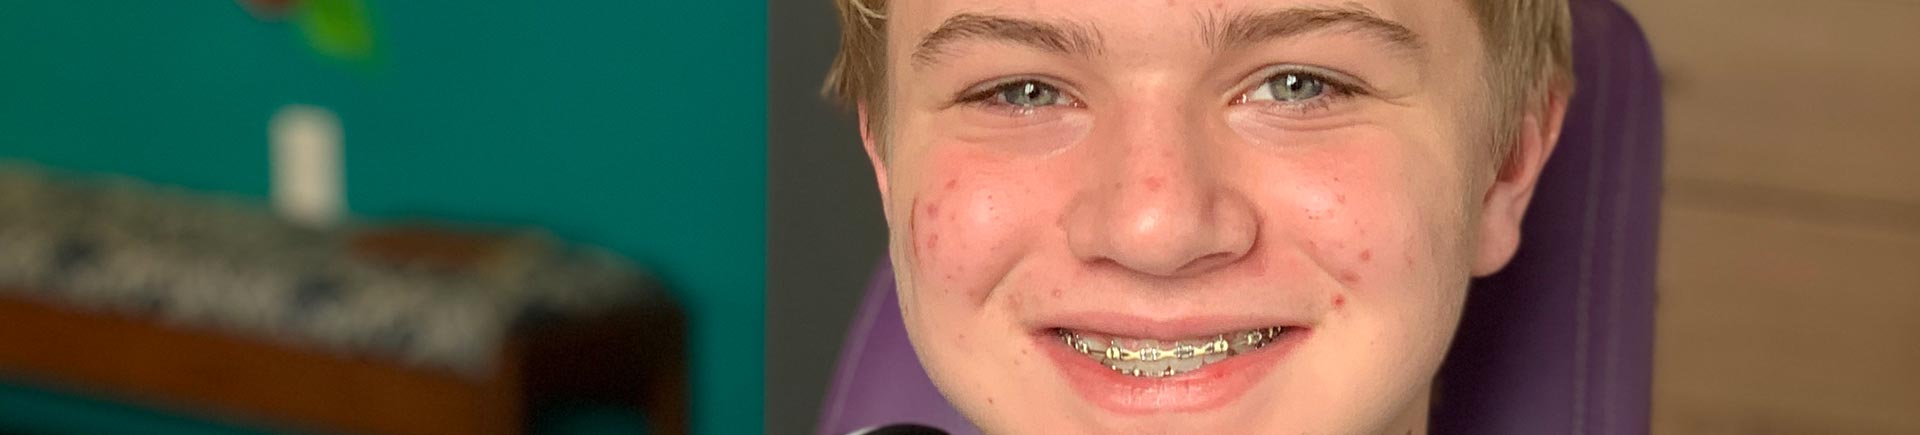 teenager with orthodontic braces